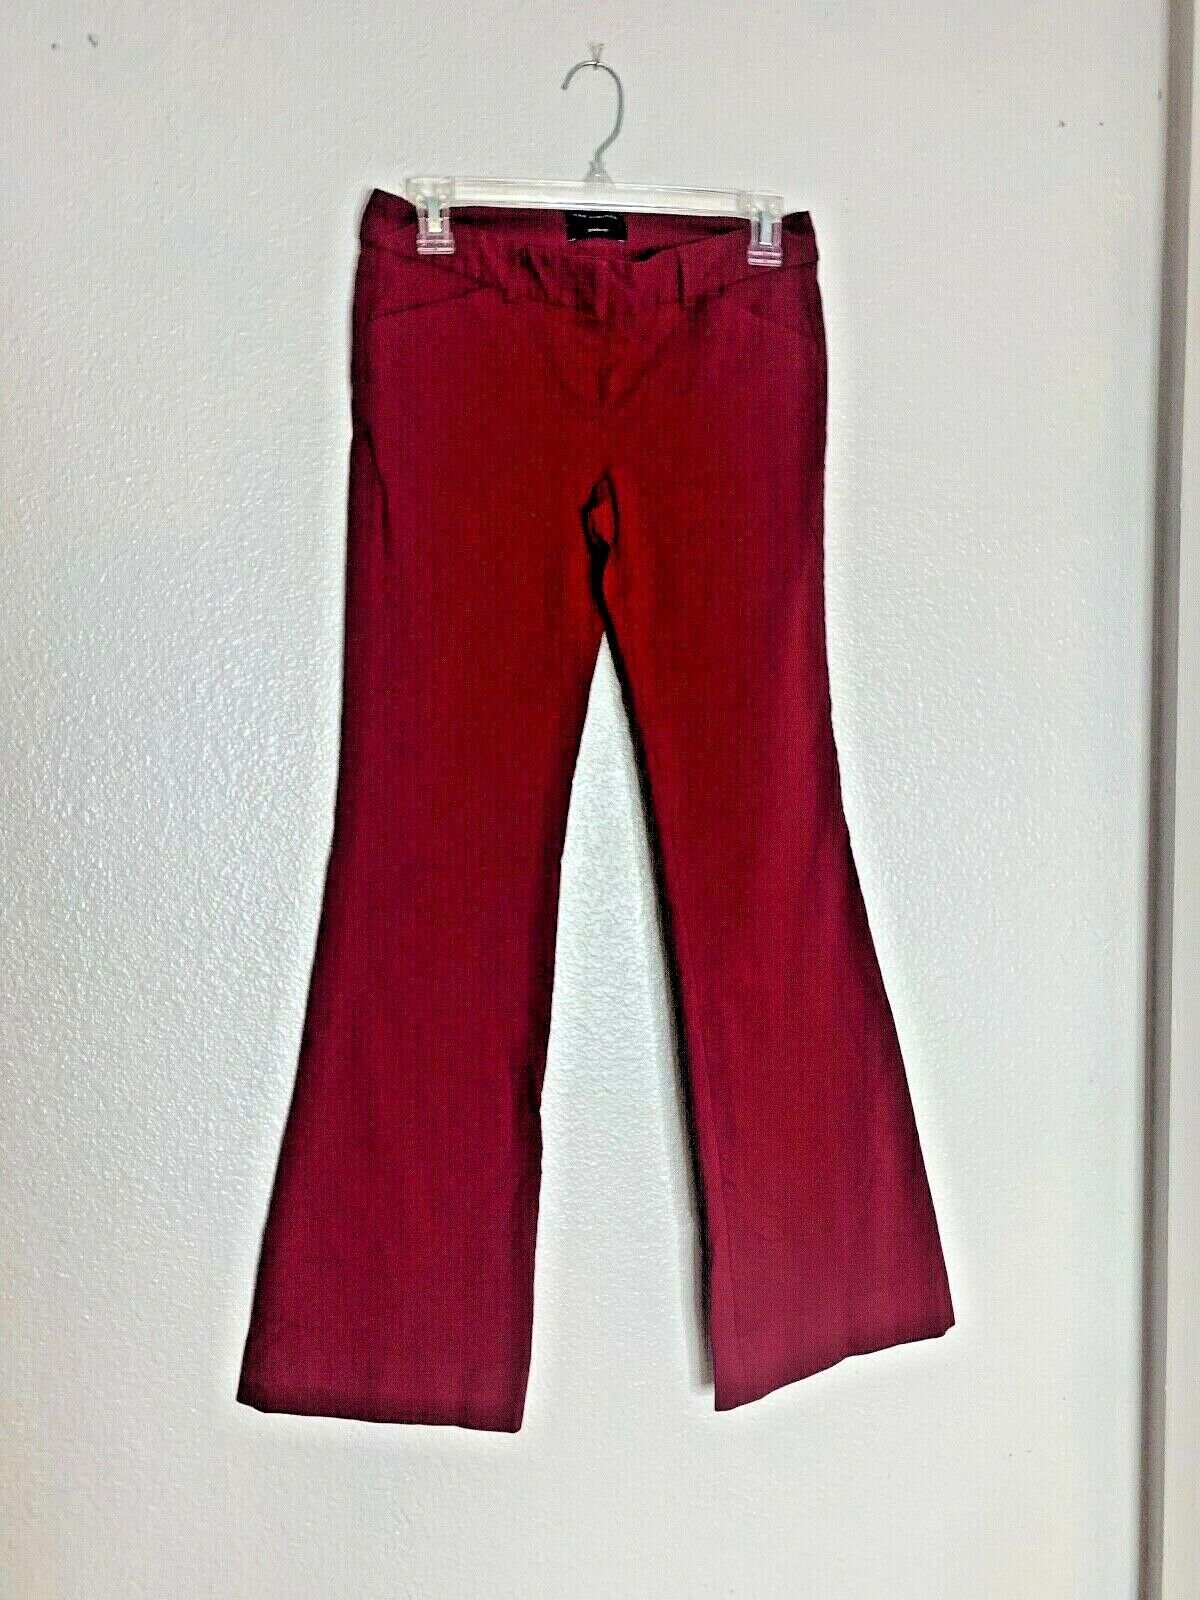 Primary image for The Limited Womens Sz 4 Drew Fit Pants Burgundy Dress Pants